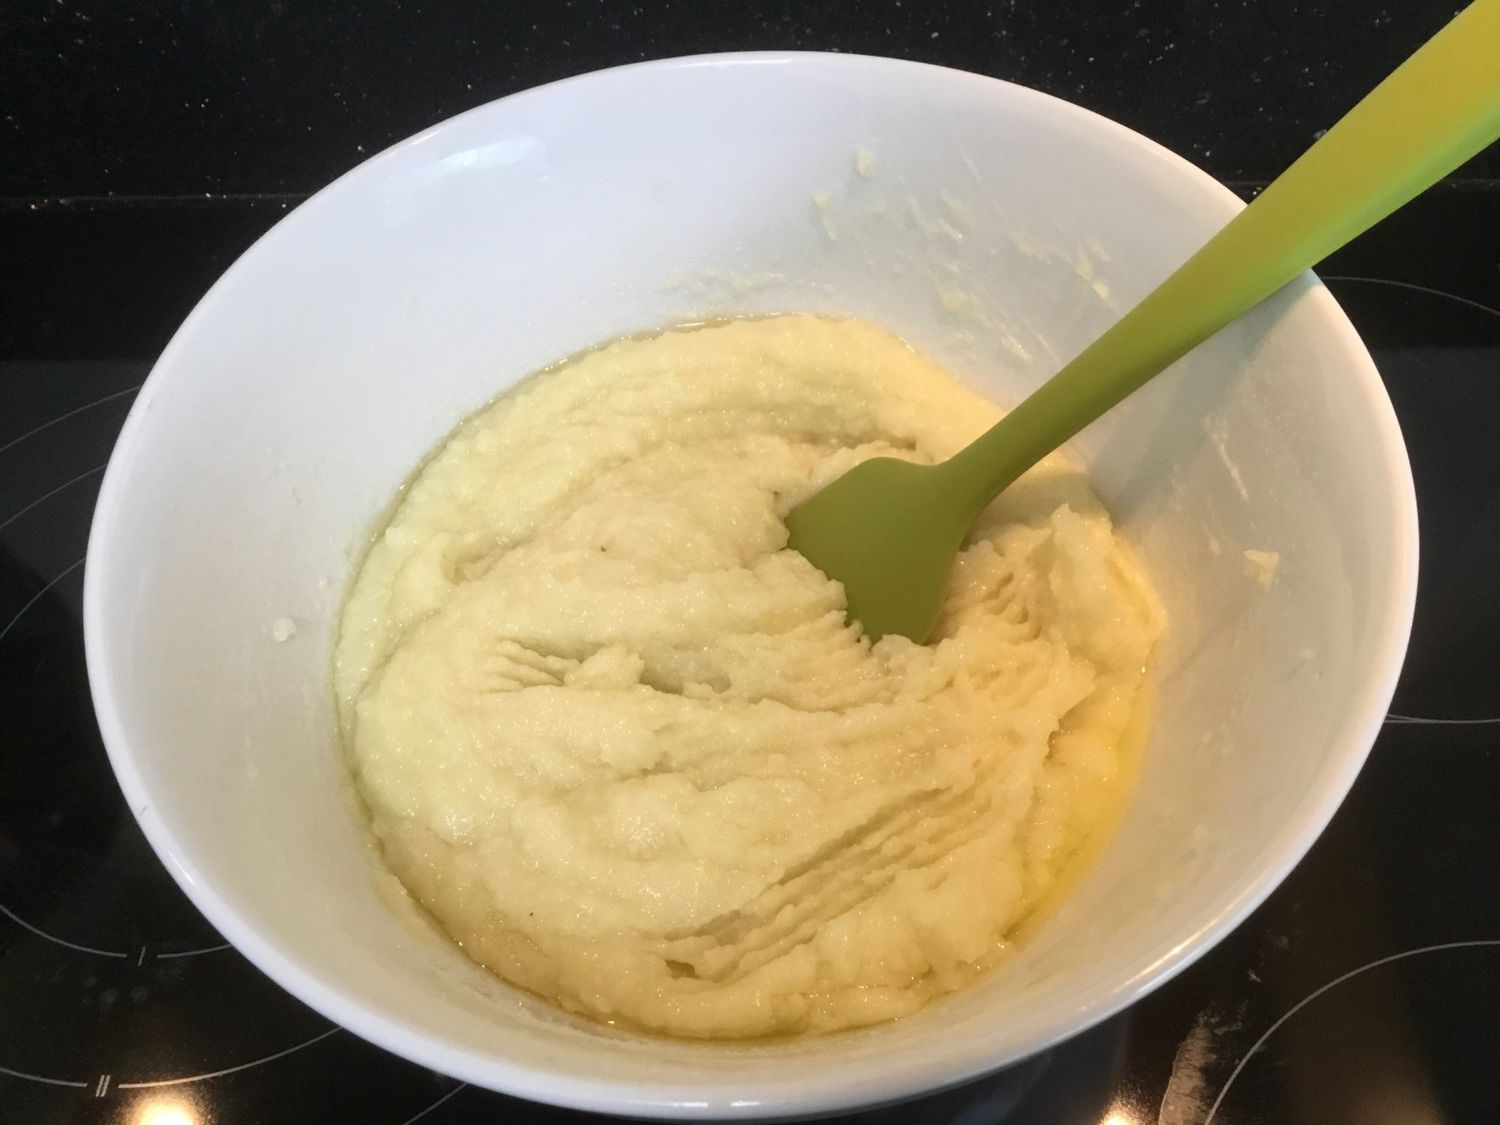 creamy spread in a white bowl with green fork